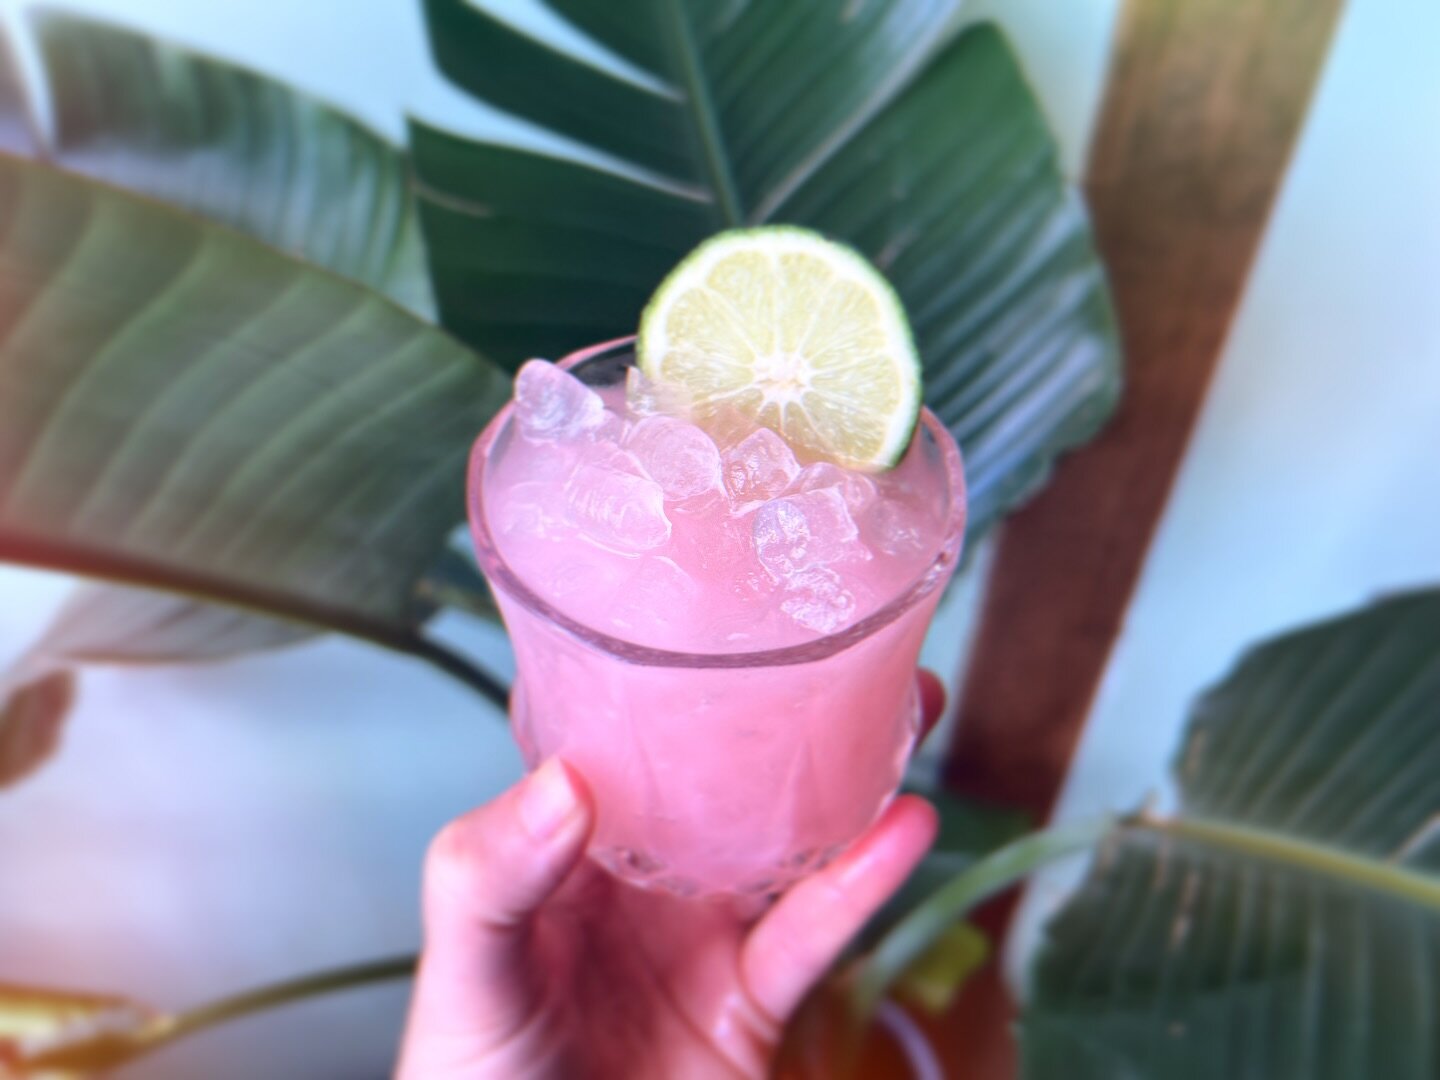 Hawaiian Sunset 🌸 🌅 @albanydistillingco ALB Vodka, lemon &amp; lime juice, Orgeat (almond syrup), a touch of grenadine. A welcomed addition to our spring cocktail menu; has us dreaming of warmer days ahead.

Open 1-11 🍻✨